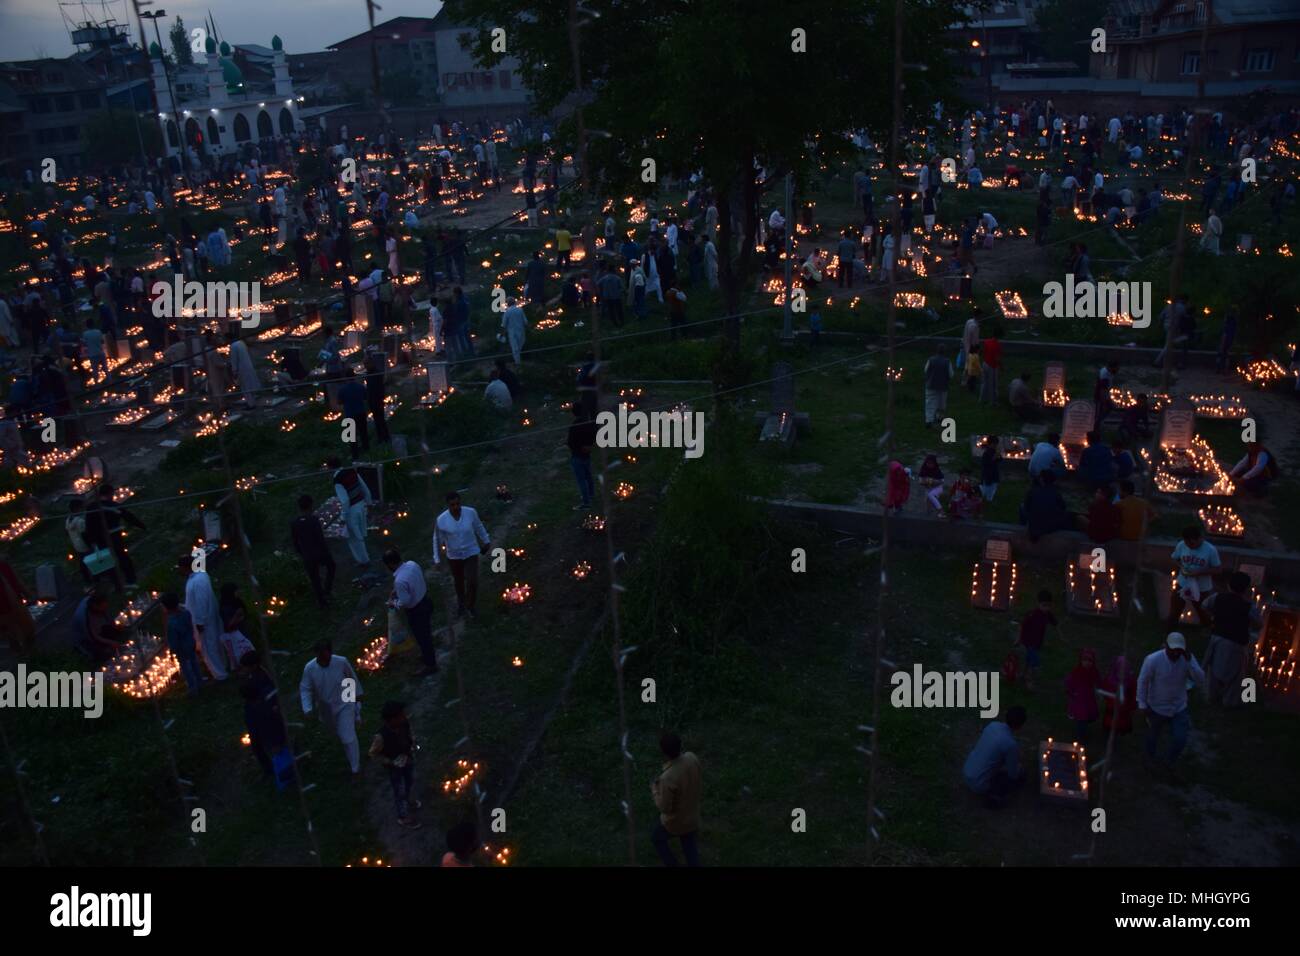 May 1, 2018 - Srinagar, Jammu & Kashmir, India - Kashmiri Shia Muslims light candles on graves on the occasion of Shab-e-Baraat.Every year, Shab-e-Barat is observed on the night between 14th and 15th of Sha'aban, which is the eighth month of the Islamic calendar. According to Islam, Shab-e-Barat means the night of forgiveness. It is considered to be the night when Allah forgives sinners.Shab-e-Barat is also known as Bara'a Night and Mid-Sha'ban. In The Arab world, it's referred to as Laylat al-Bara'at. The festival falls in the run up to Ramadan and is considered the night when Allah forgive Stock Photo